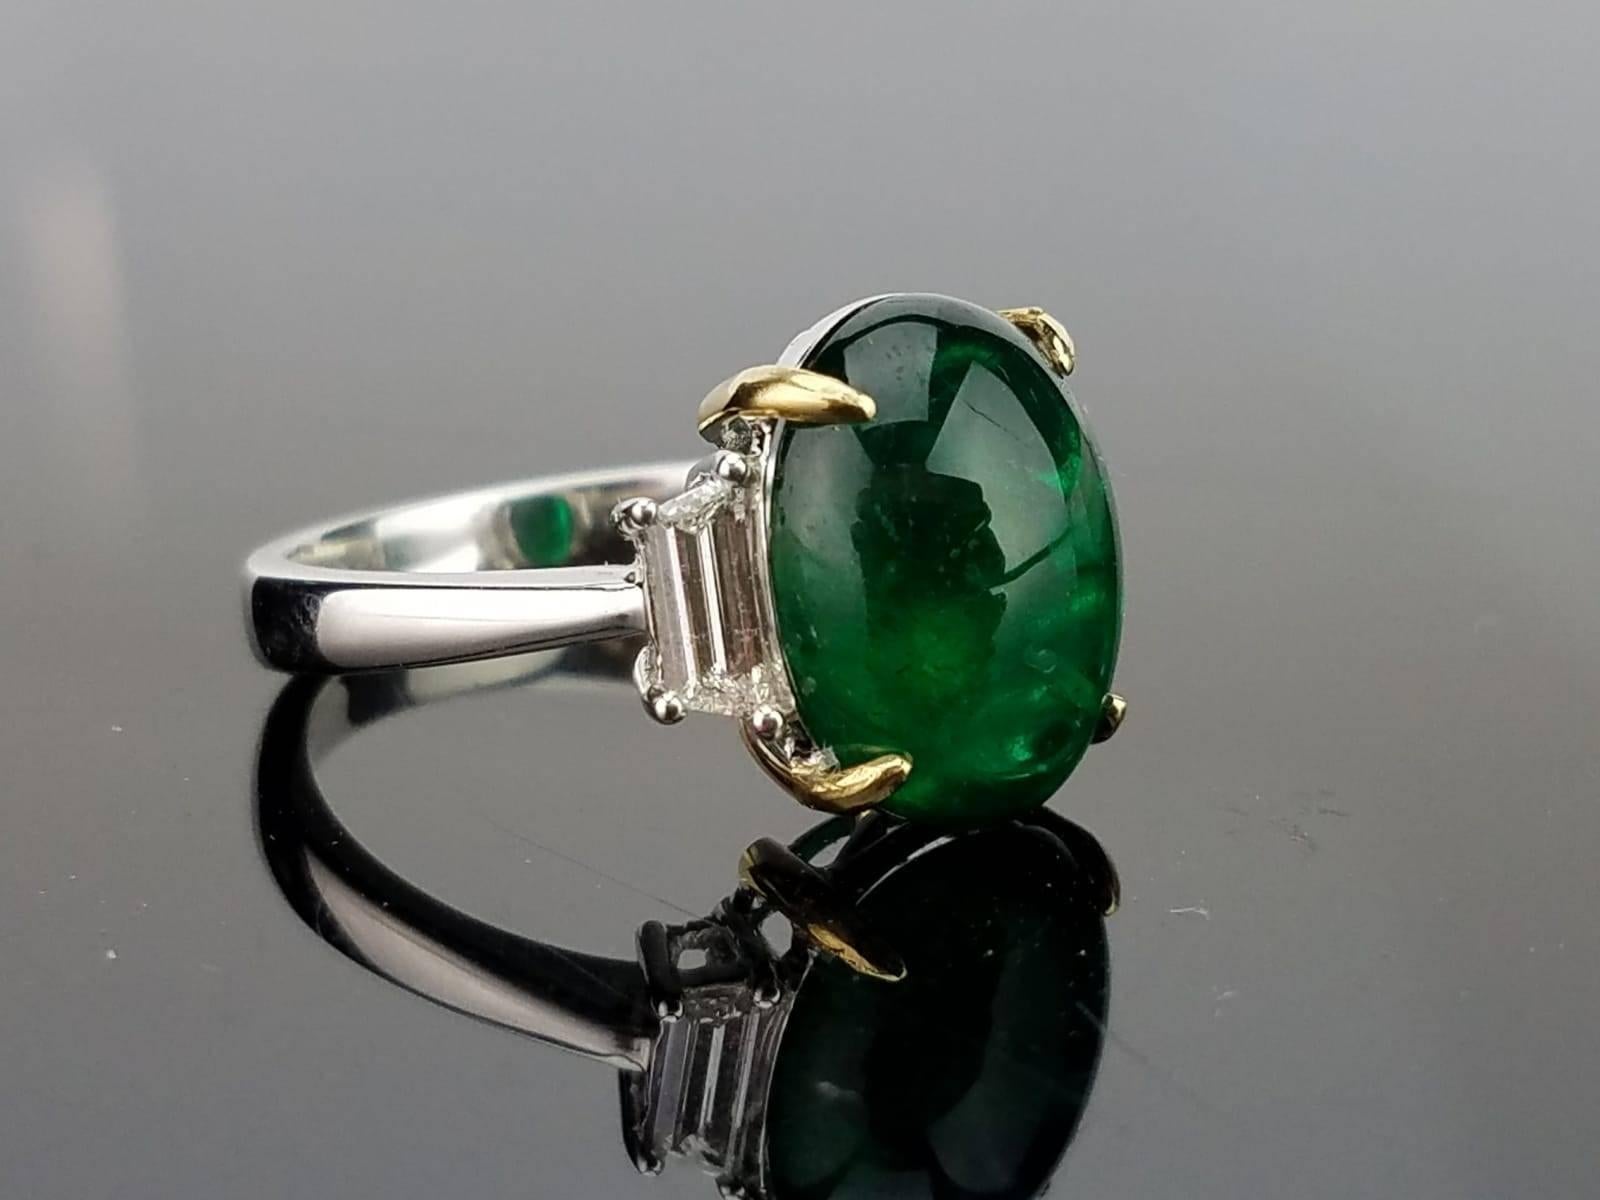 A classic three stone ring, with a 5.78 carat lustrous and deep coloured Zambian Emerald centre stone and 2 baguette side stone diamonds. 

Stone Details: 
Stone: Zambian Emerald
Carat Weight: 5.78 Carats

Diamond Details: 
Total Carat Weight: 0.38